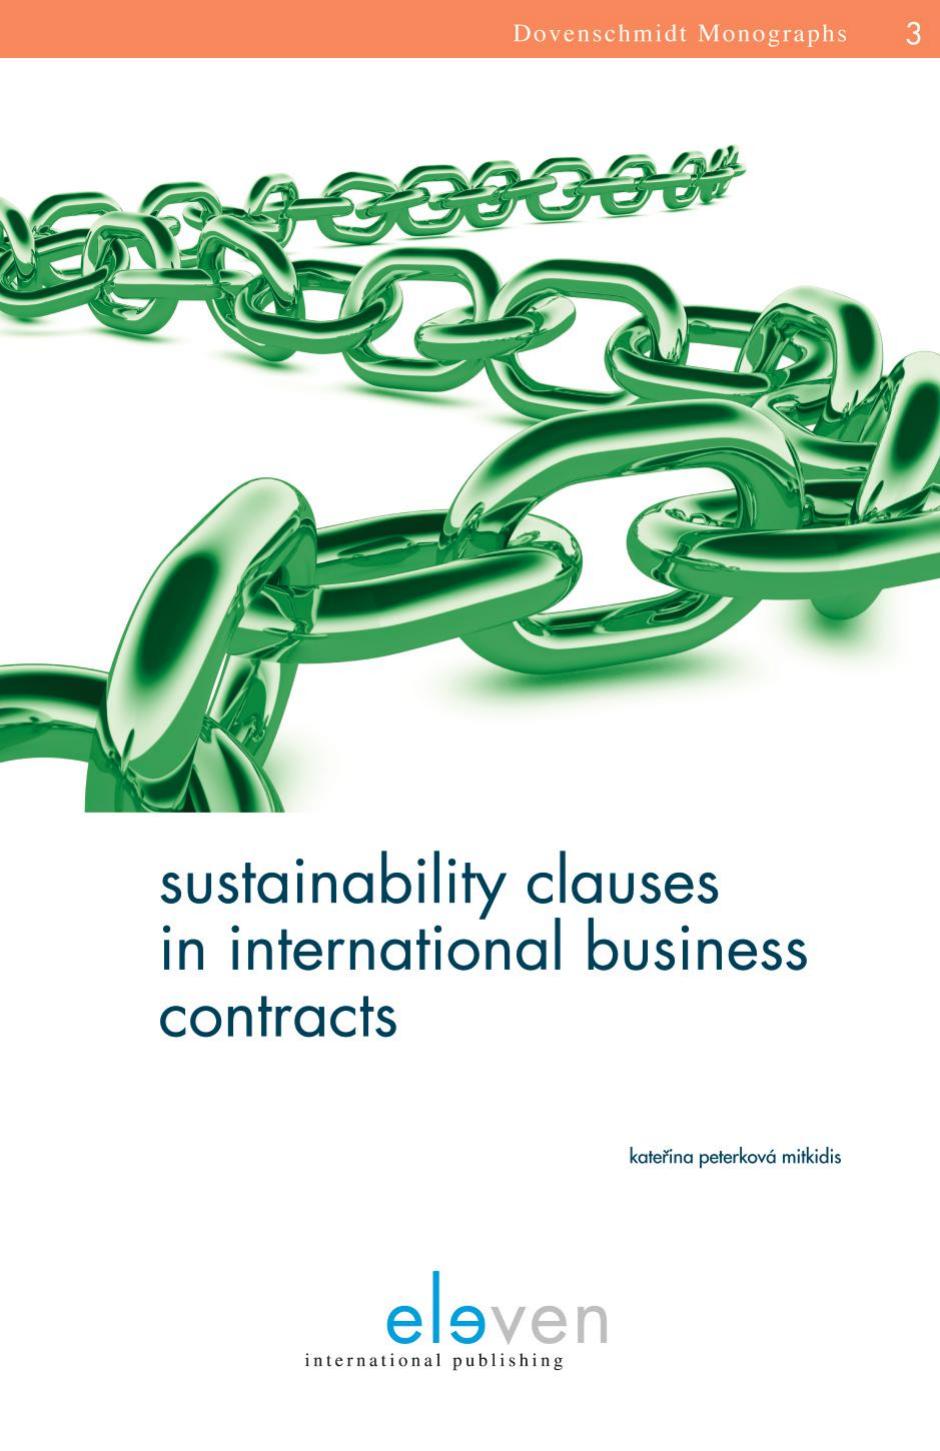 Sustainability Clauses in International Business Contracts by Katerina Peterkova Mitkidis